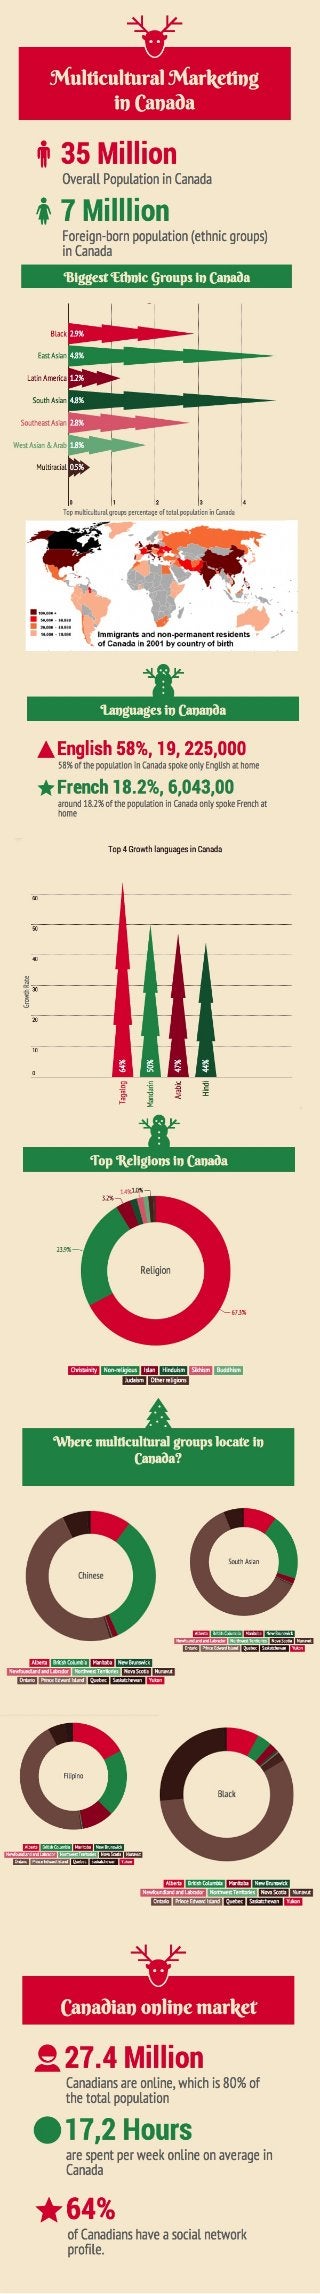 Online Marketing Infographic: Multicultural Marketing in Canada